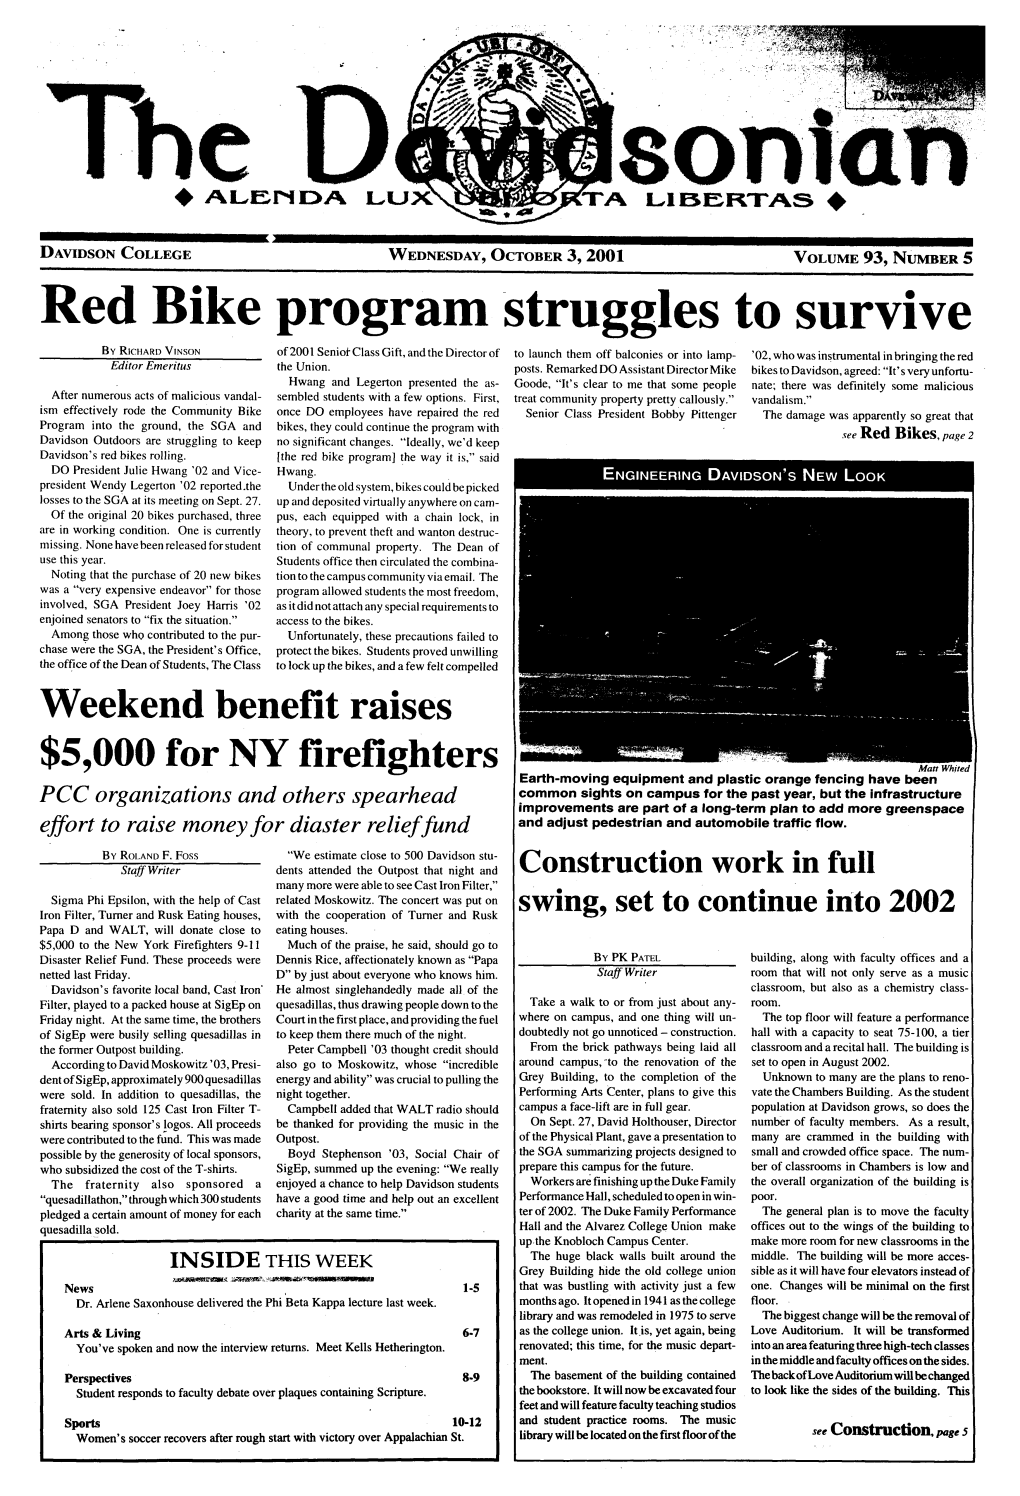 Redbikes Bunge Is Professor of Cell Biology and Anatomy at Theuniversityofmiamischool Redbikes,Frompage2 Ally,We Treat [The Bikes] Well,Andthey Work Remains Uncertain